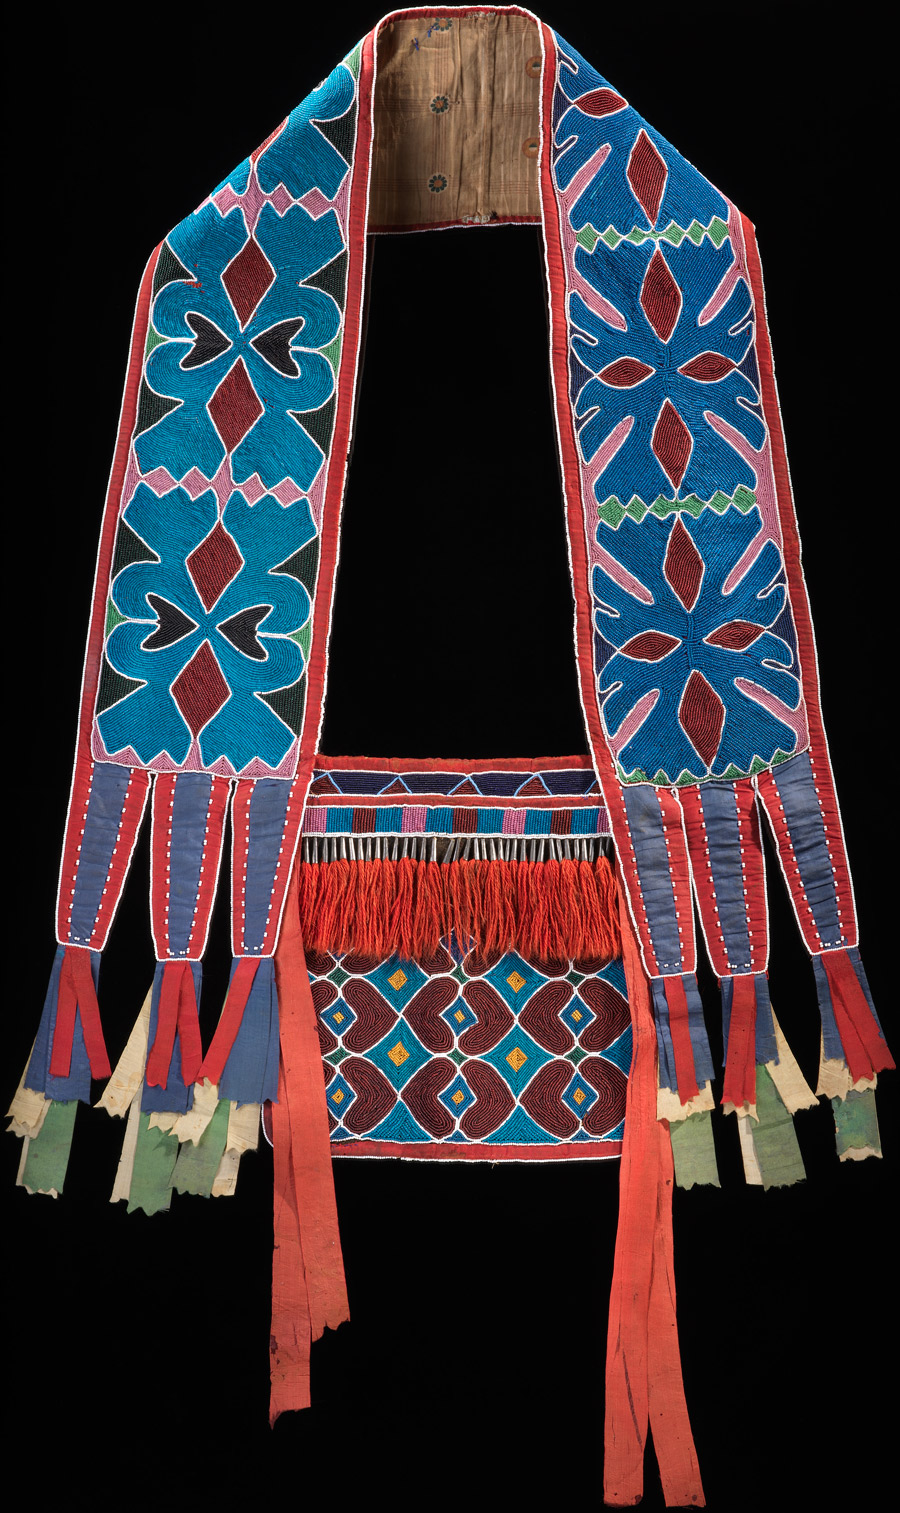 Bandolier bag, Lenape (Delaware tribe, Oklahoma), c. 1850, hide, cotton cloth, silk ribbon, glass beads, wool yarn, metal cones, 68 x 47 cm (National Museum of the American Indian, New York)